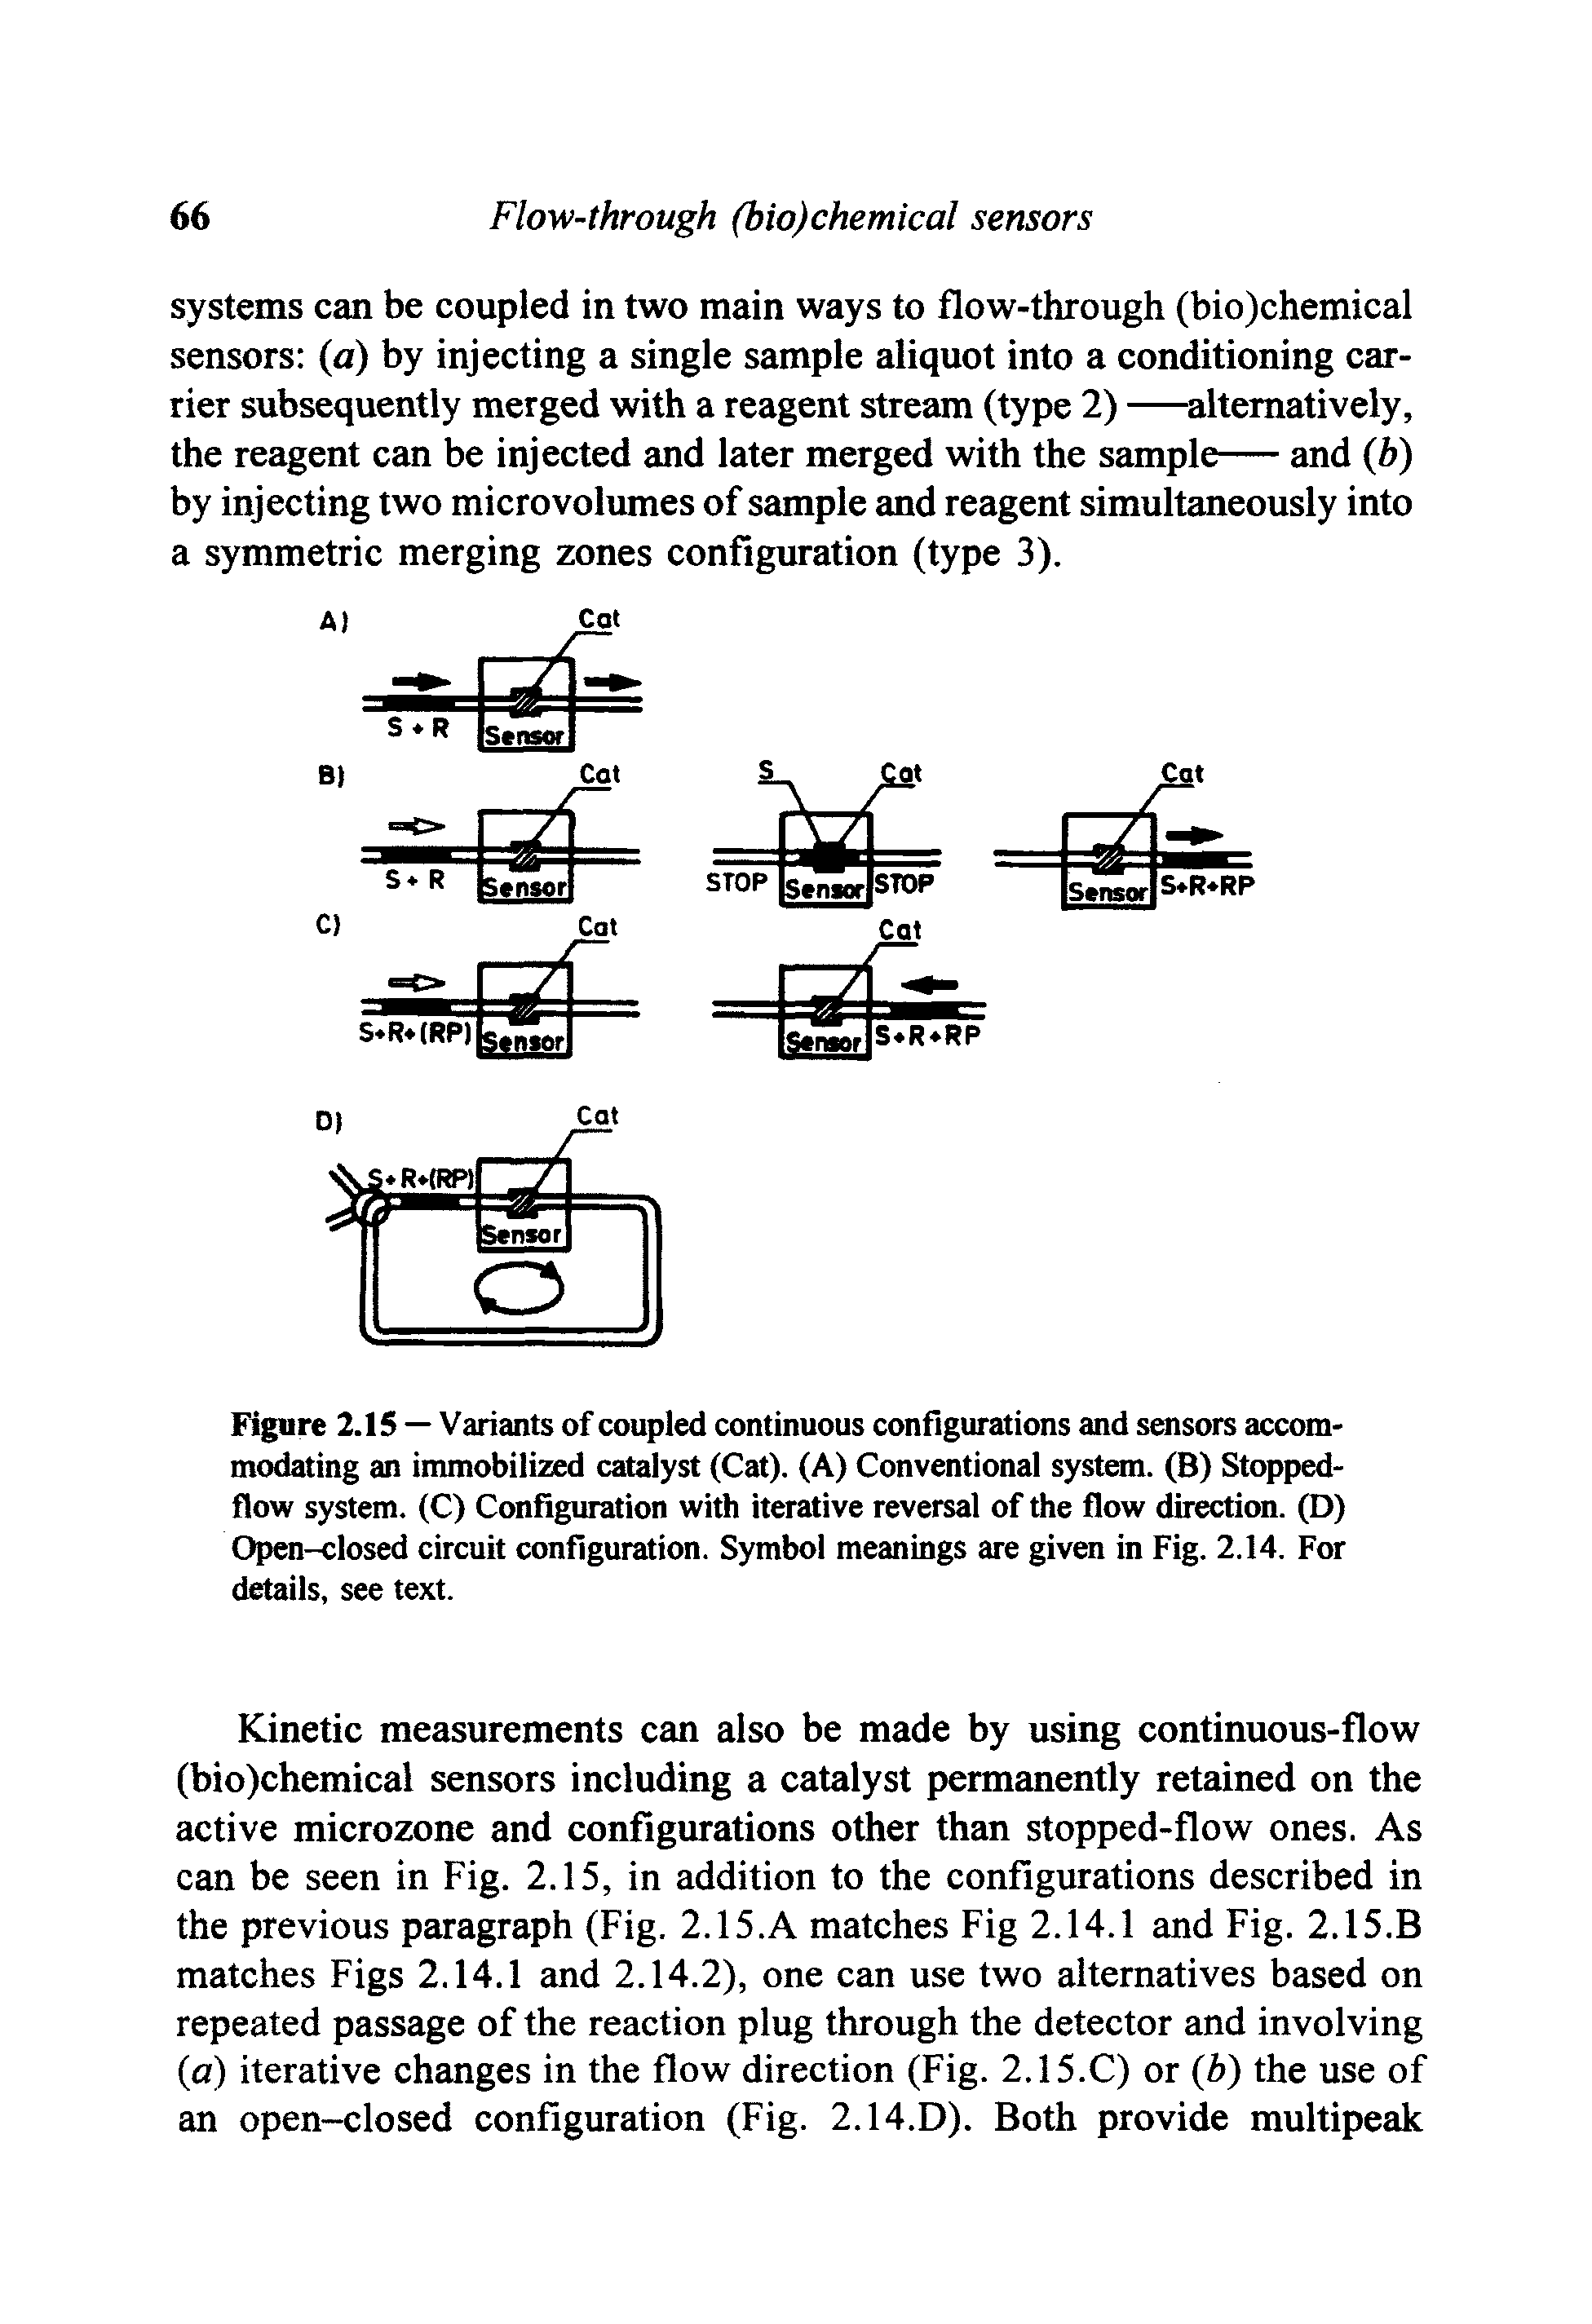 Figure 2.15 — Variants of coupled continuous configurations and sensors accommodating an immobilized catalyst (Cat). (A) Conventional system. (B) Stopped-flow system. (C) Configuration with iterative reversal of the flow direction. (D) Open-closed circuit configuration. Symbol meanings are given in Fig. 2.14. For details, see text.